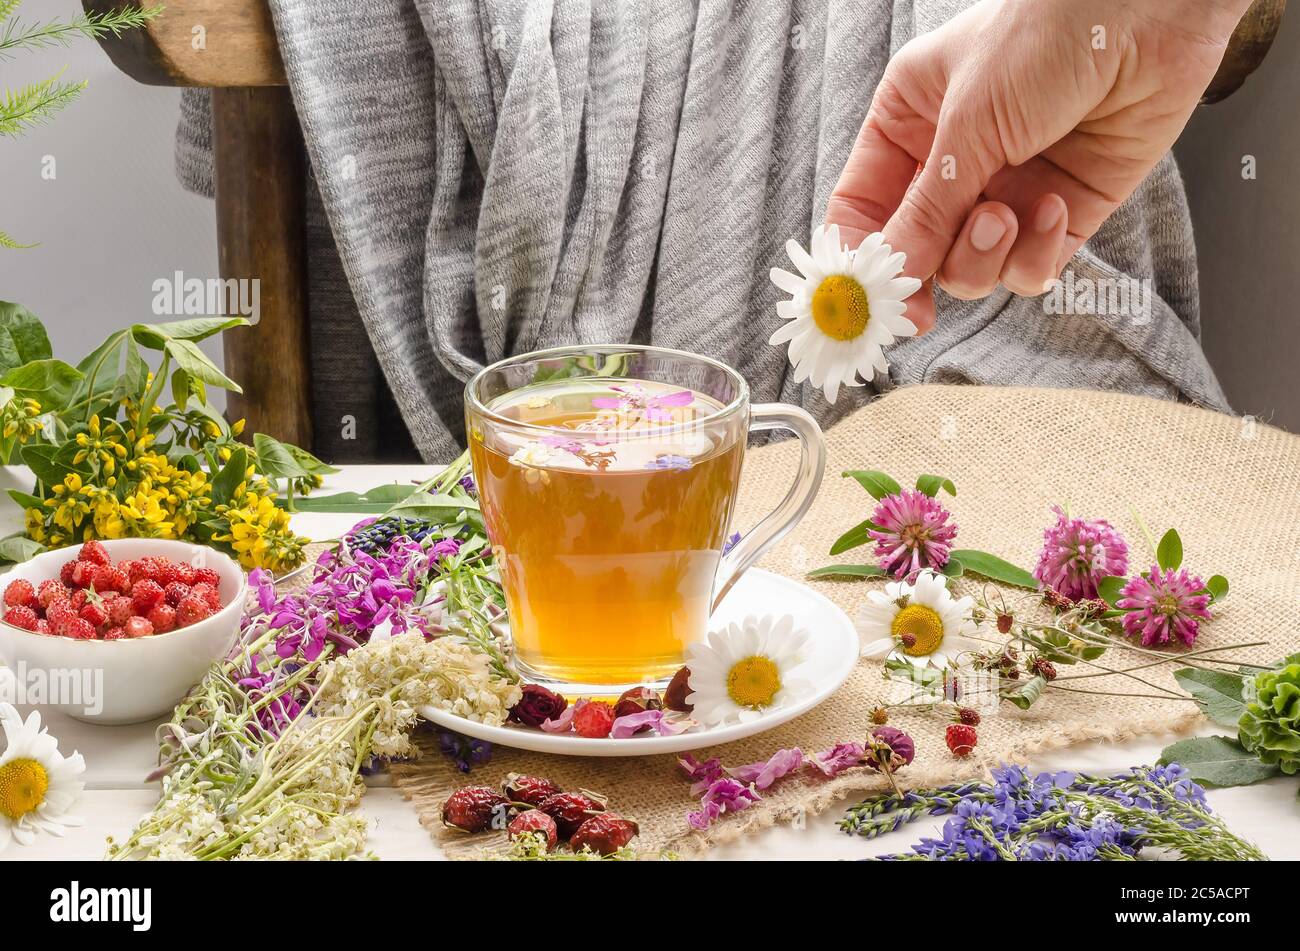 A woman brews herbal tea with chamomile. Tea ceremony. Tea with wild rose and clover Stock Photo